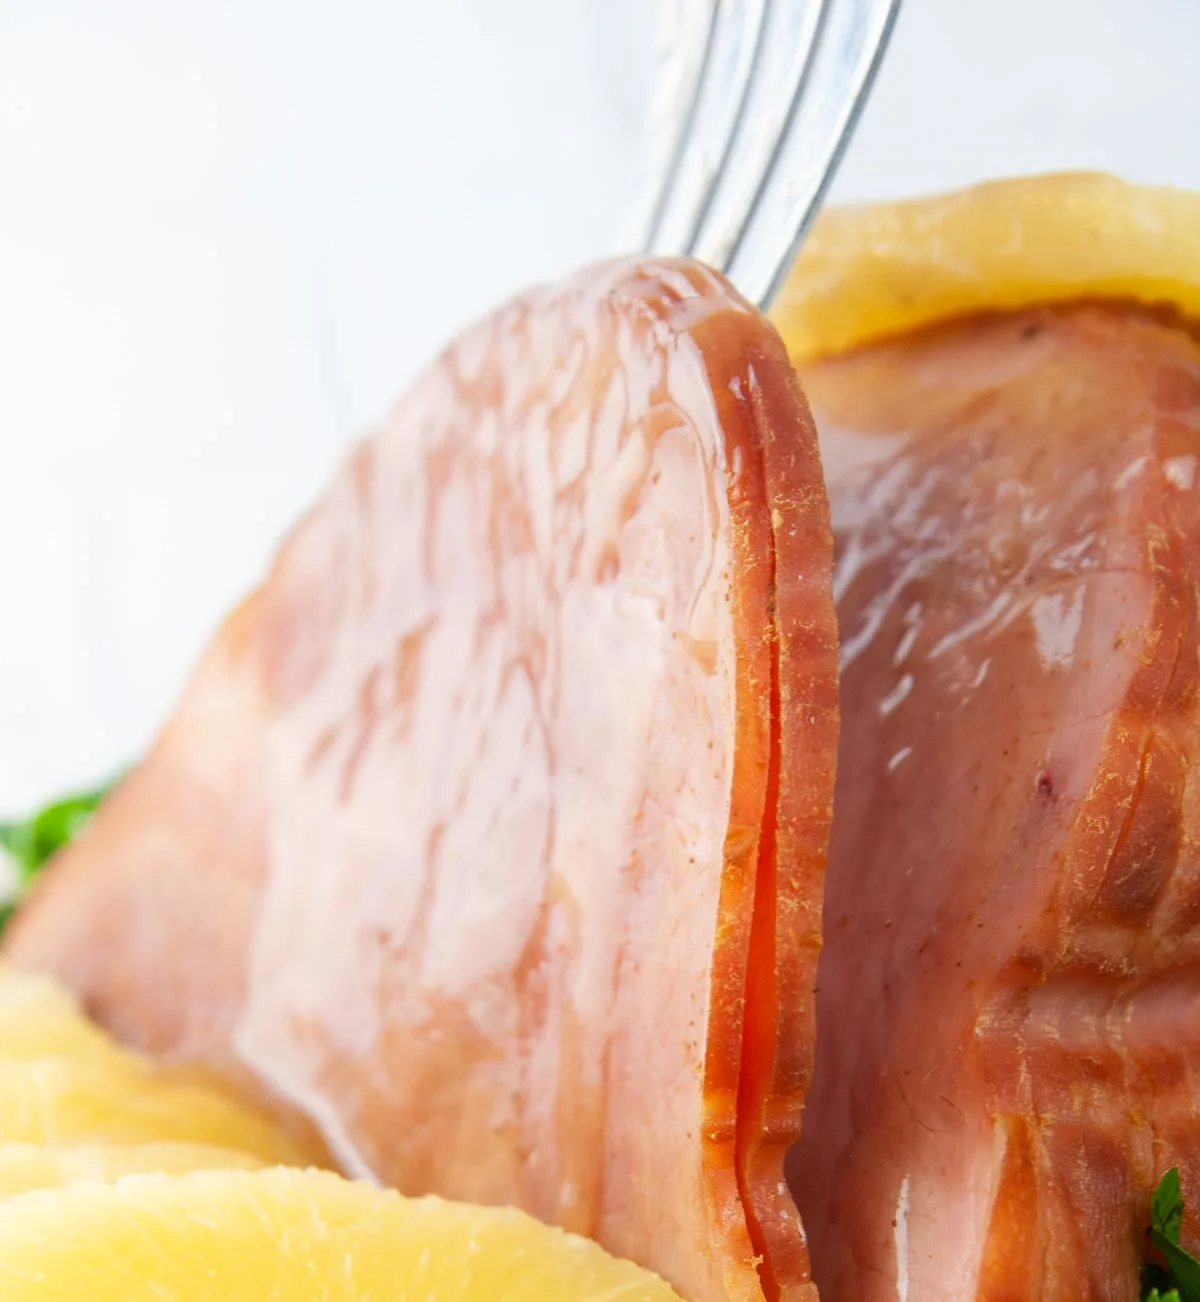 Instant Pot Ham with Honey Glaze is a delicious holiday dinner main dish you can make any time. This foolproof recipe produces results that rival Honey Baked ham but for a fraction of the cost and in no time at all.